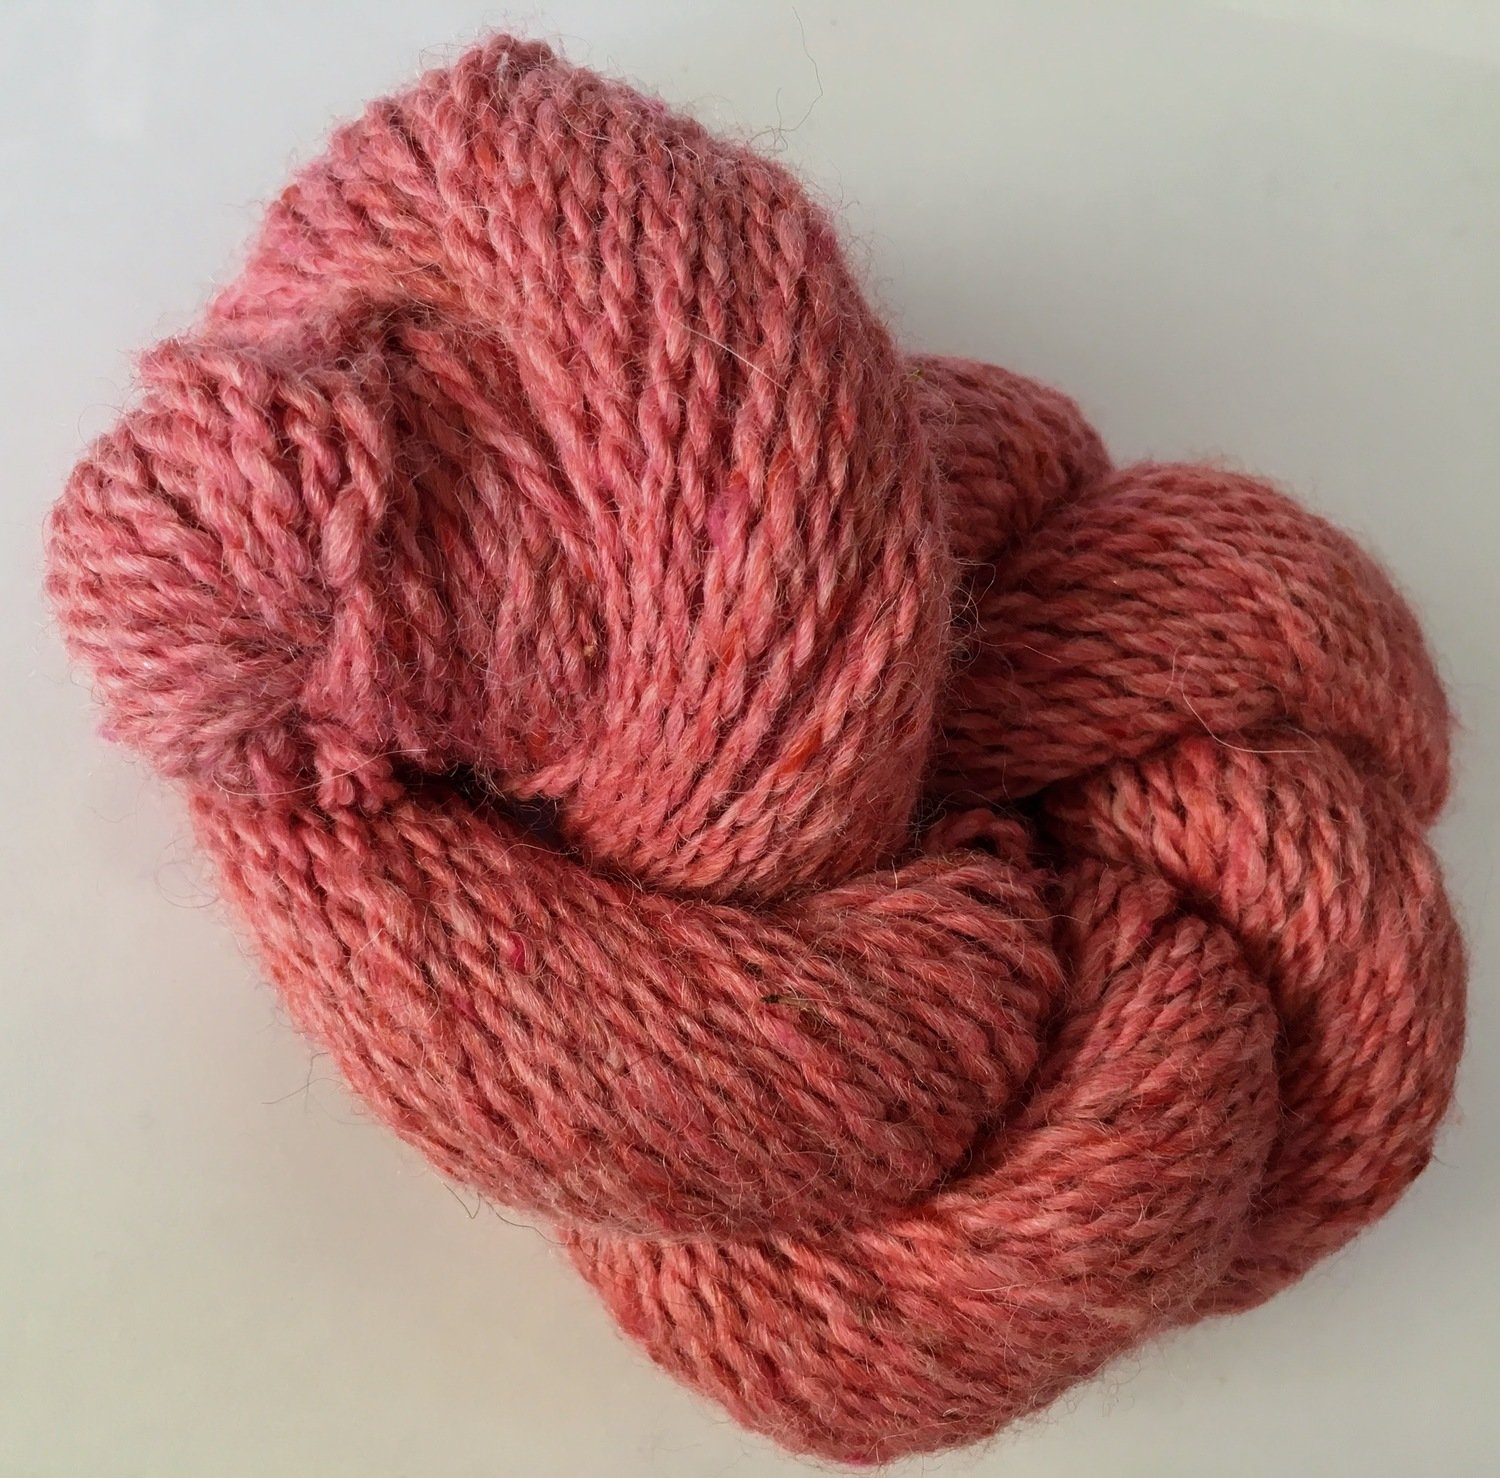 Breezy Hill Cottage-Milled, Hand-Dyed Yarn - Rose